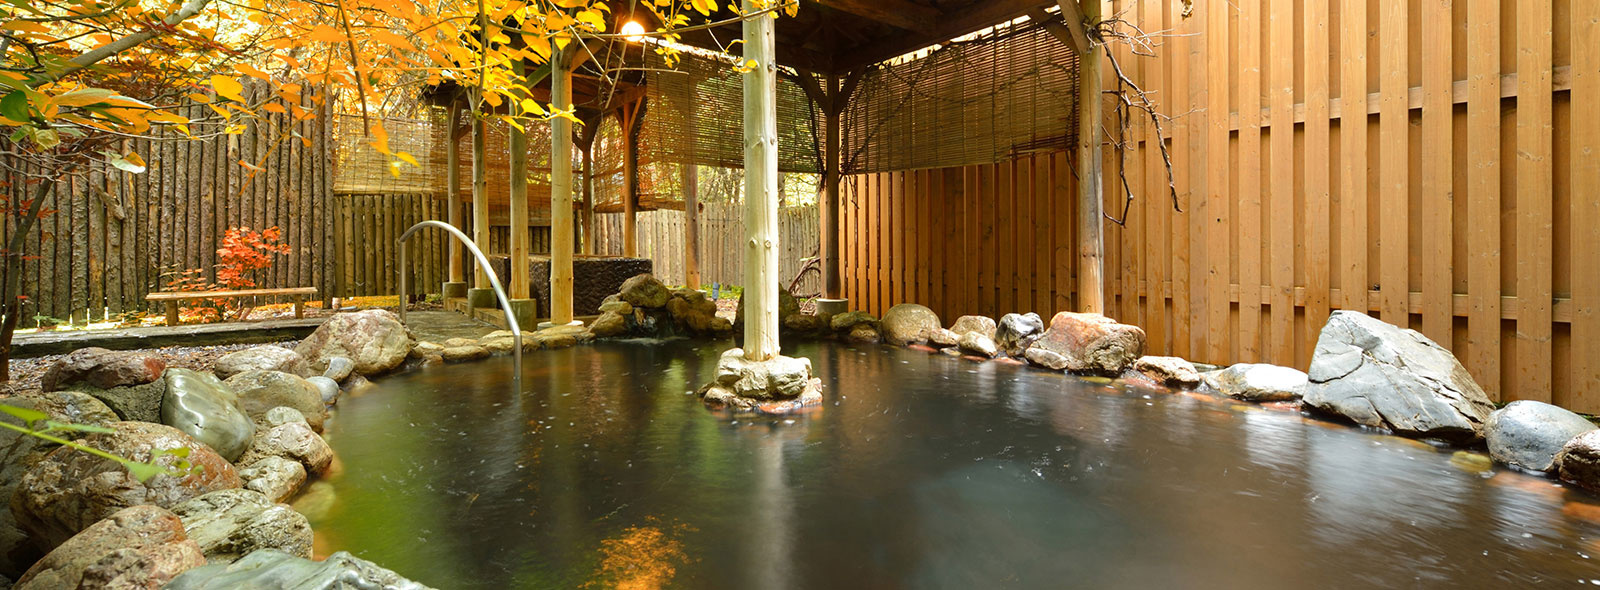 Hotels in Tokyo, Ryokan and guesthouses